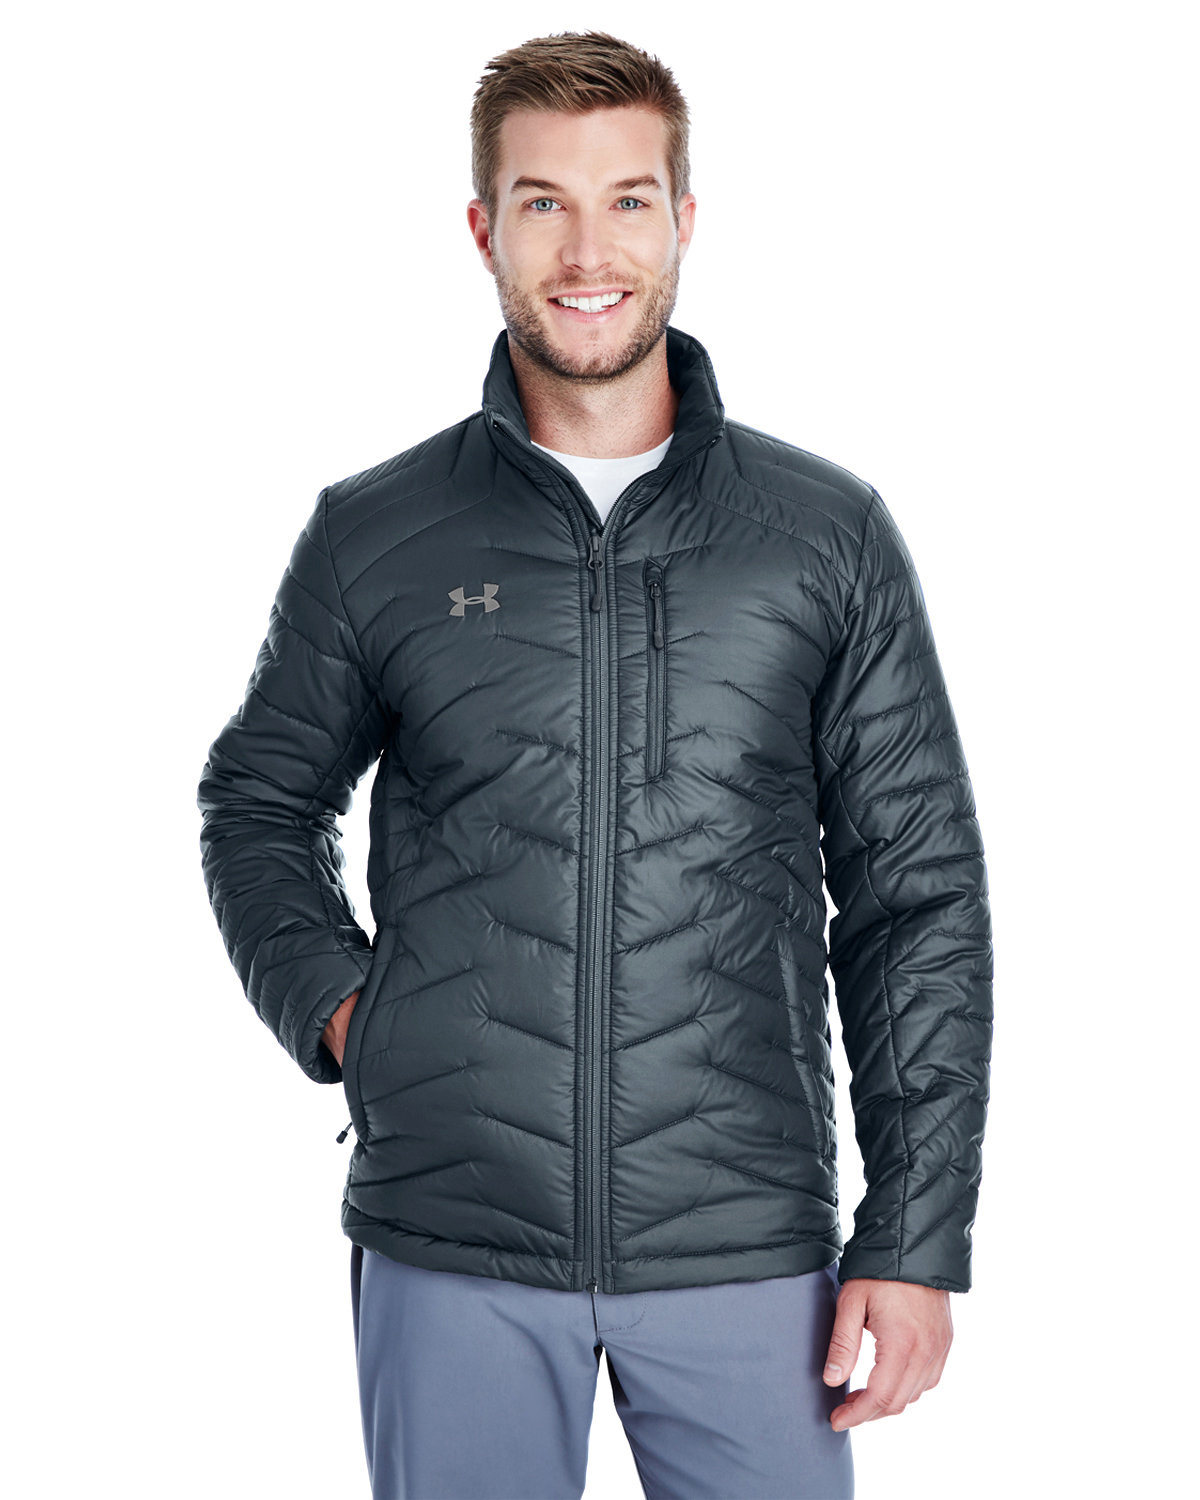 Buy Mens Corporate Reactor Jacket - Under Armour SuperSale Online at ...